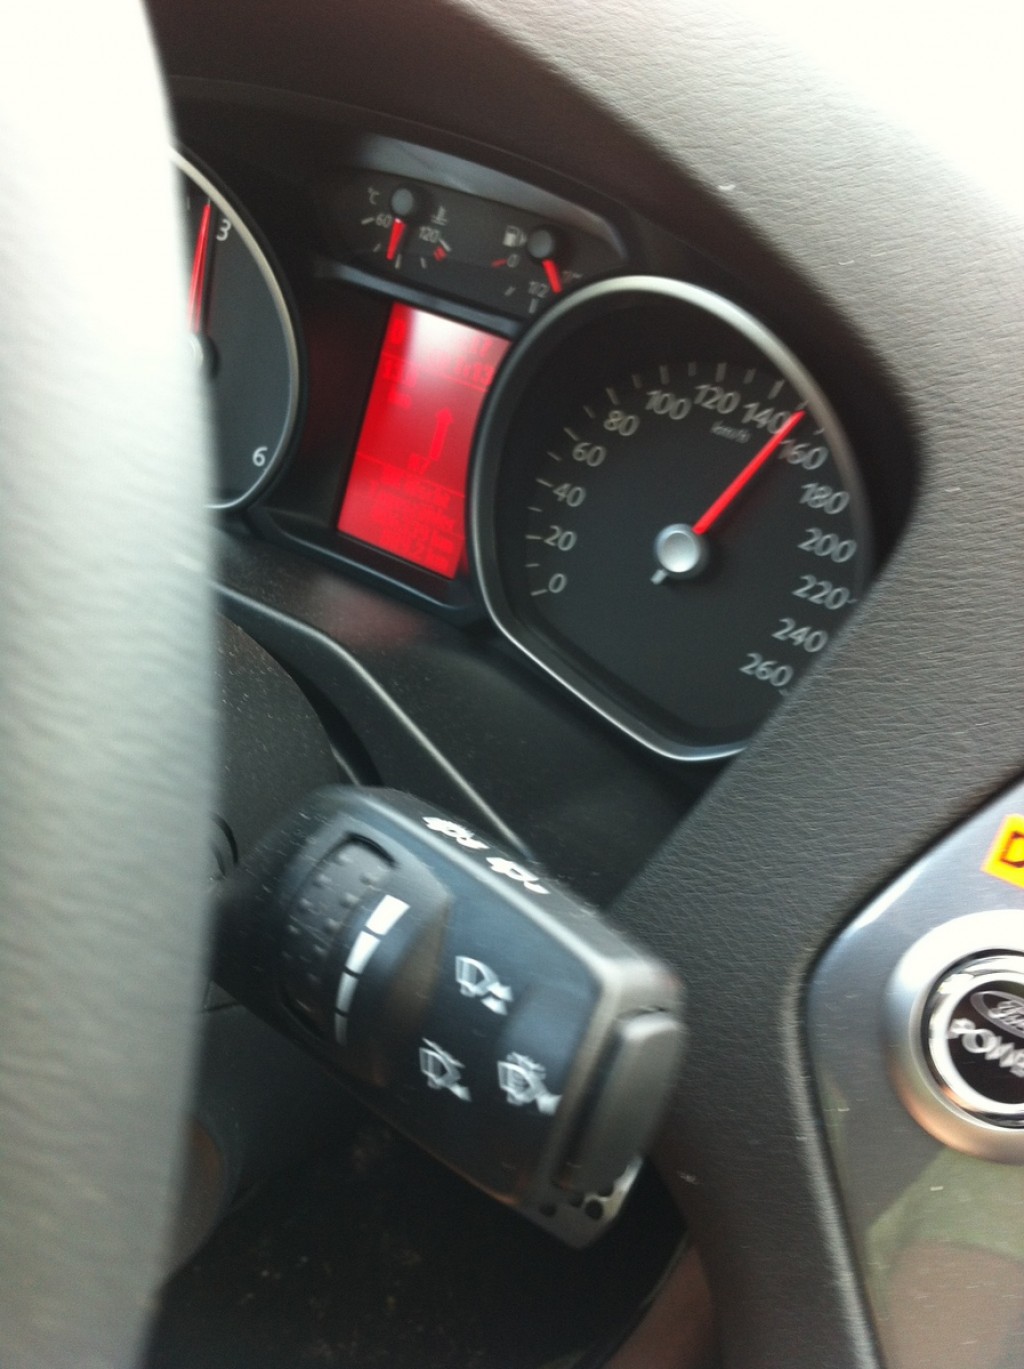 Vroom, vroom.  Enjoying the speed limit-less Autobahn on the way to Fussen